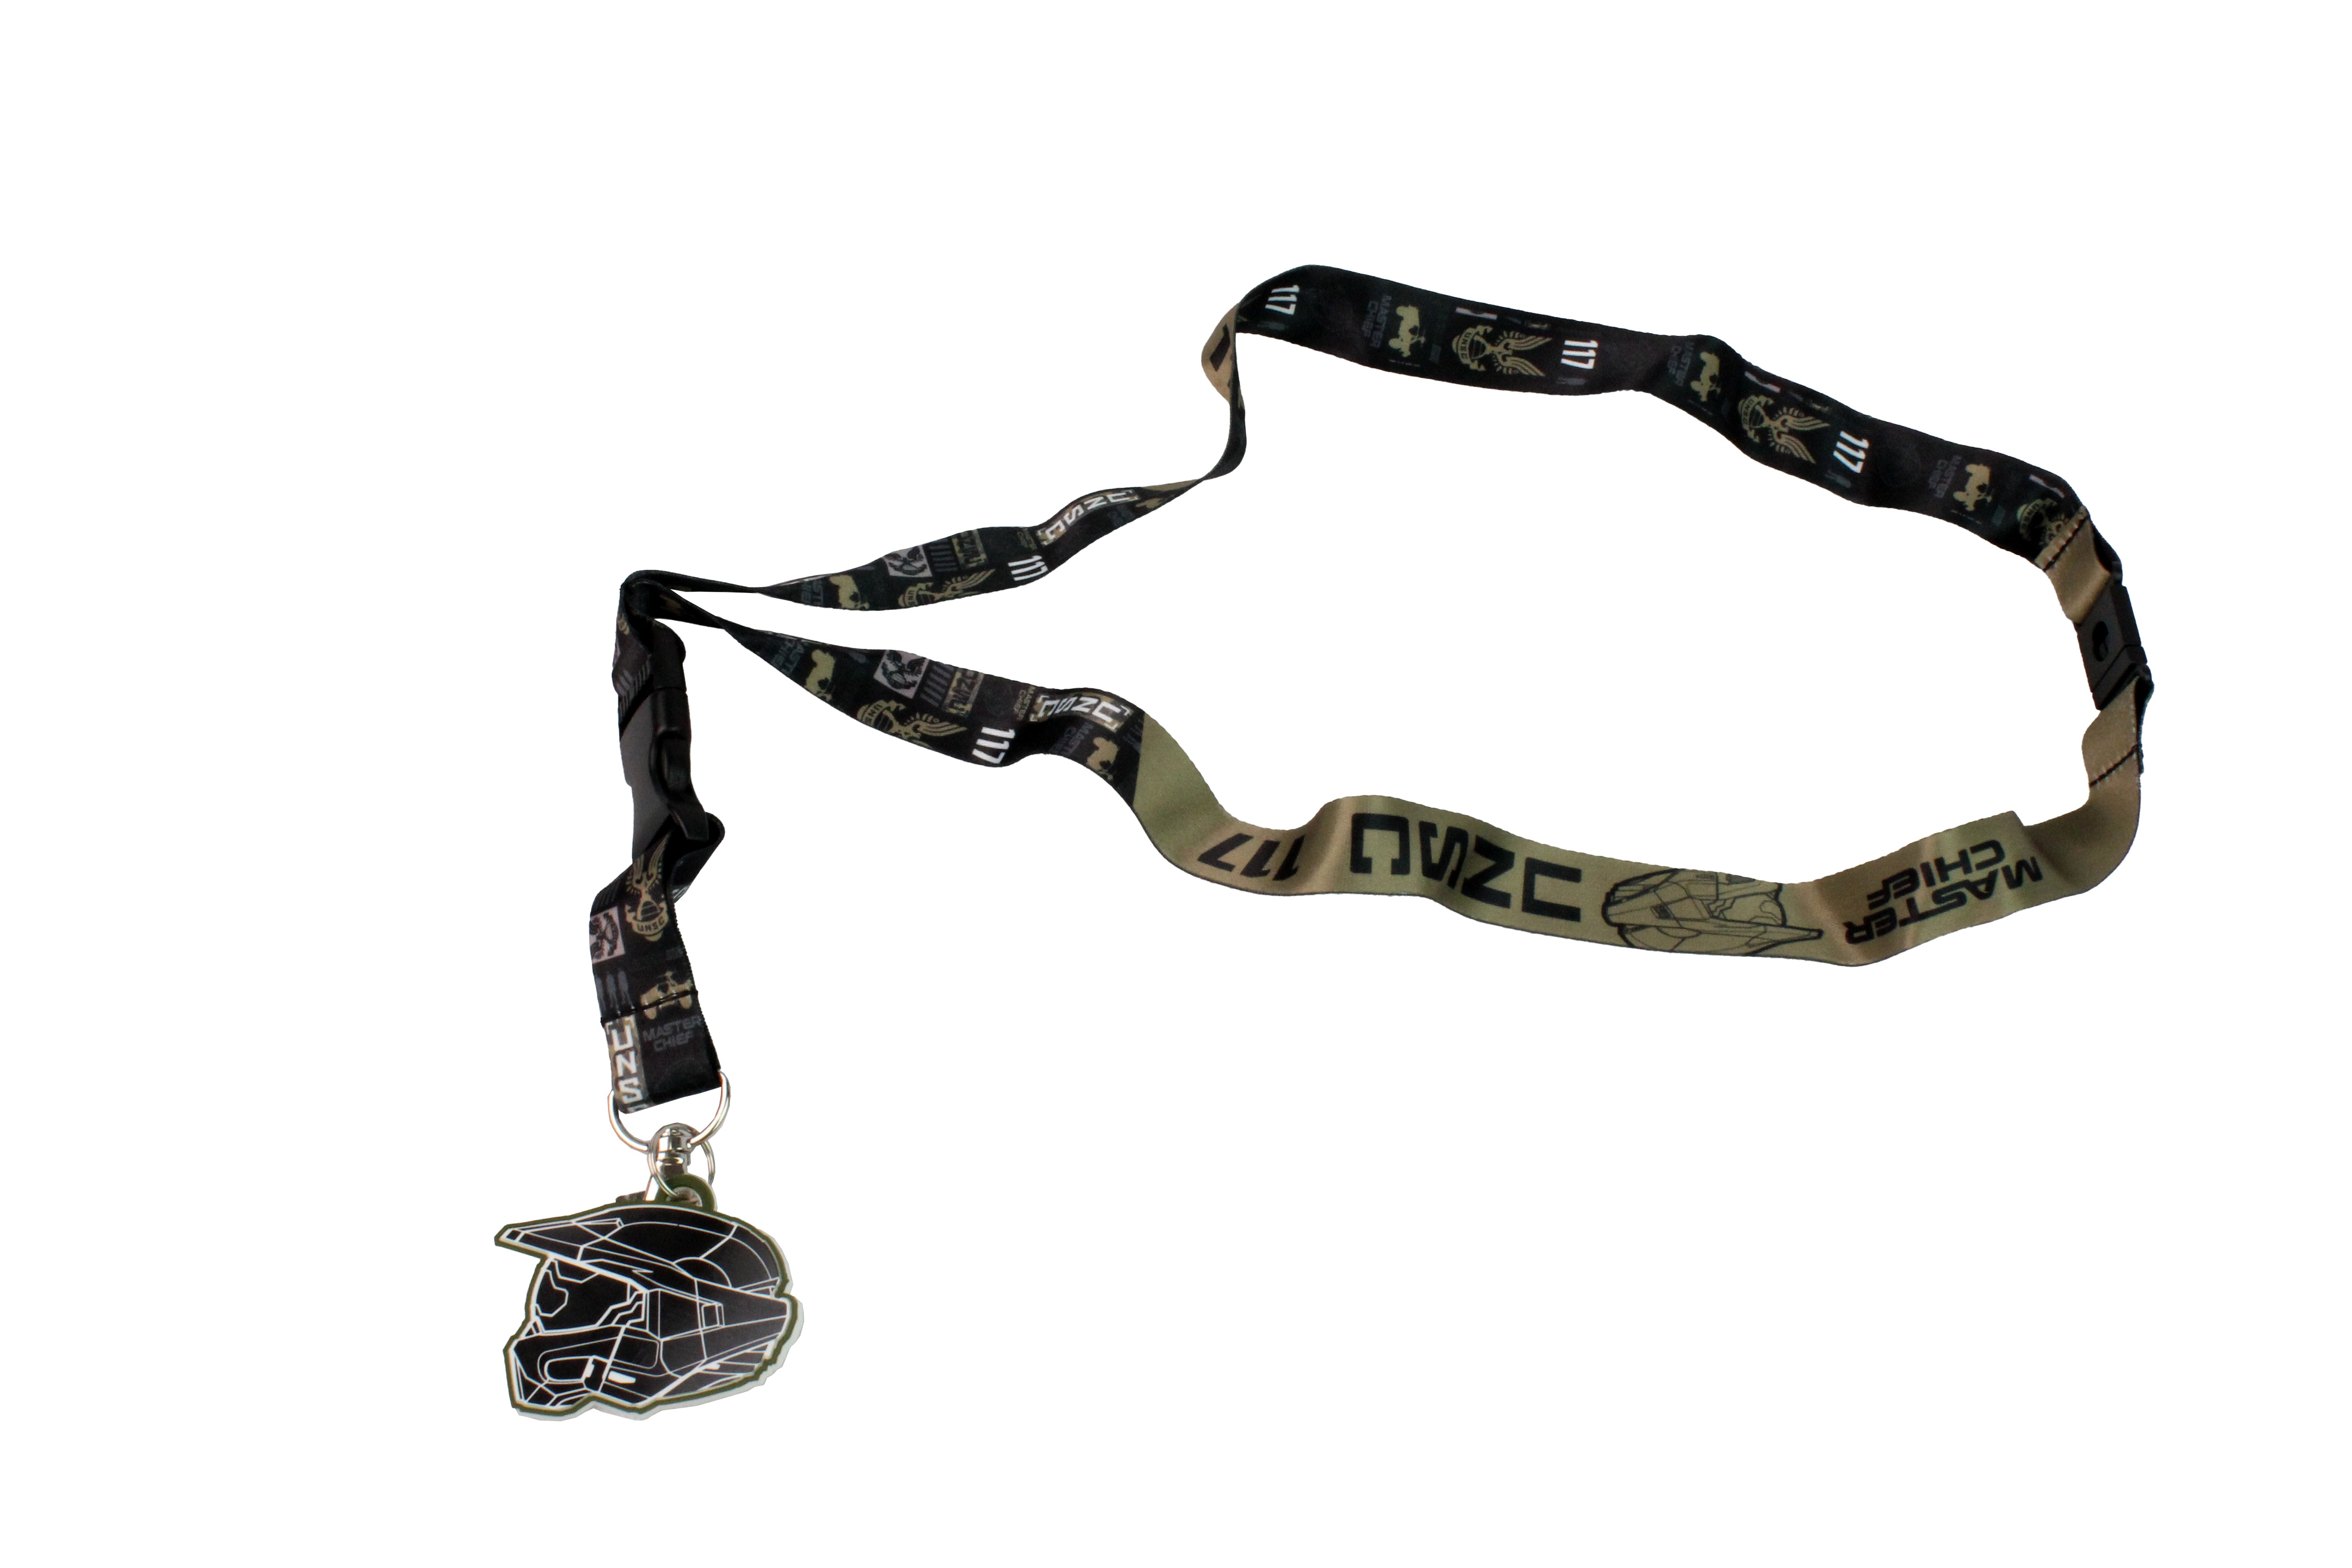 Halo UNSC 117 Master Chief Black & Gold Lanyard Keychain w/ 2" Rubber Charm